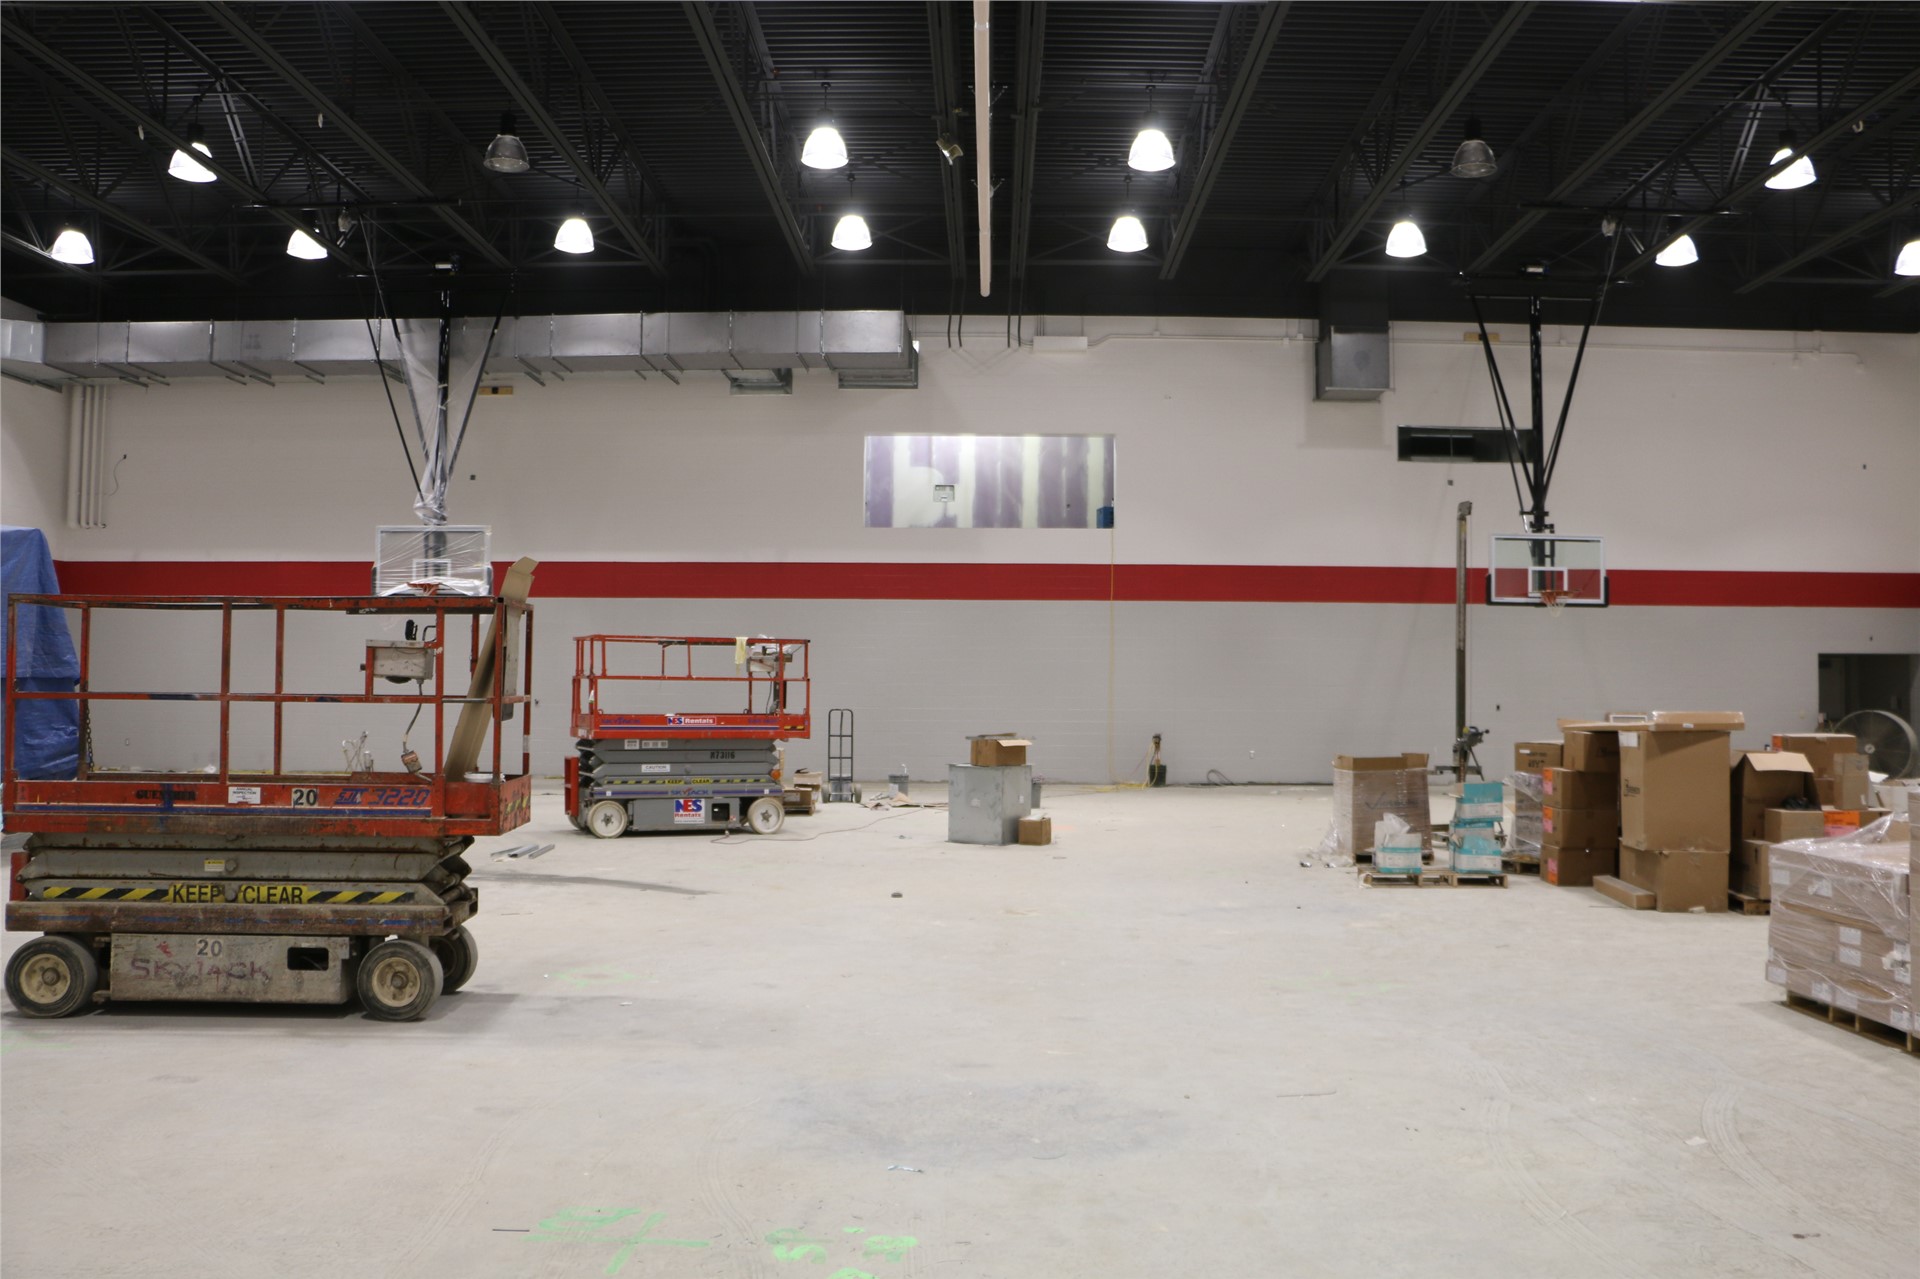 The home side of the gymnasium (press box can be seen above the red accent stripe)